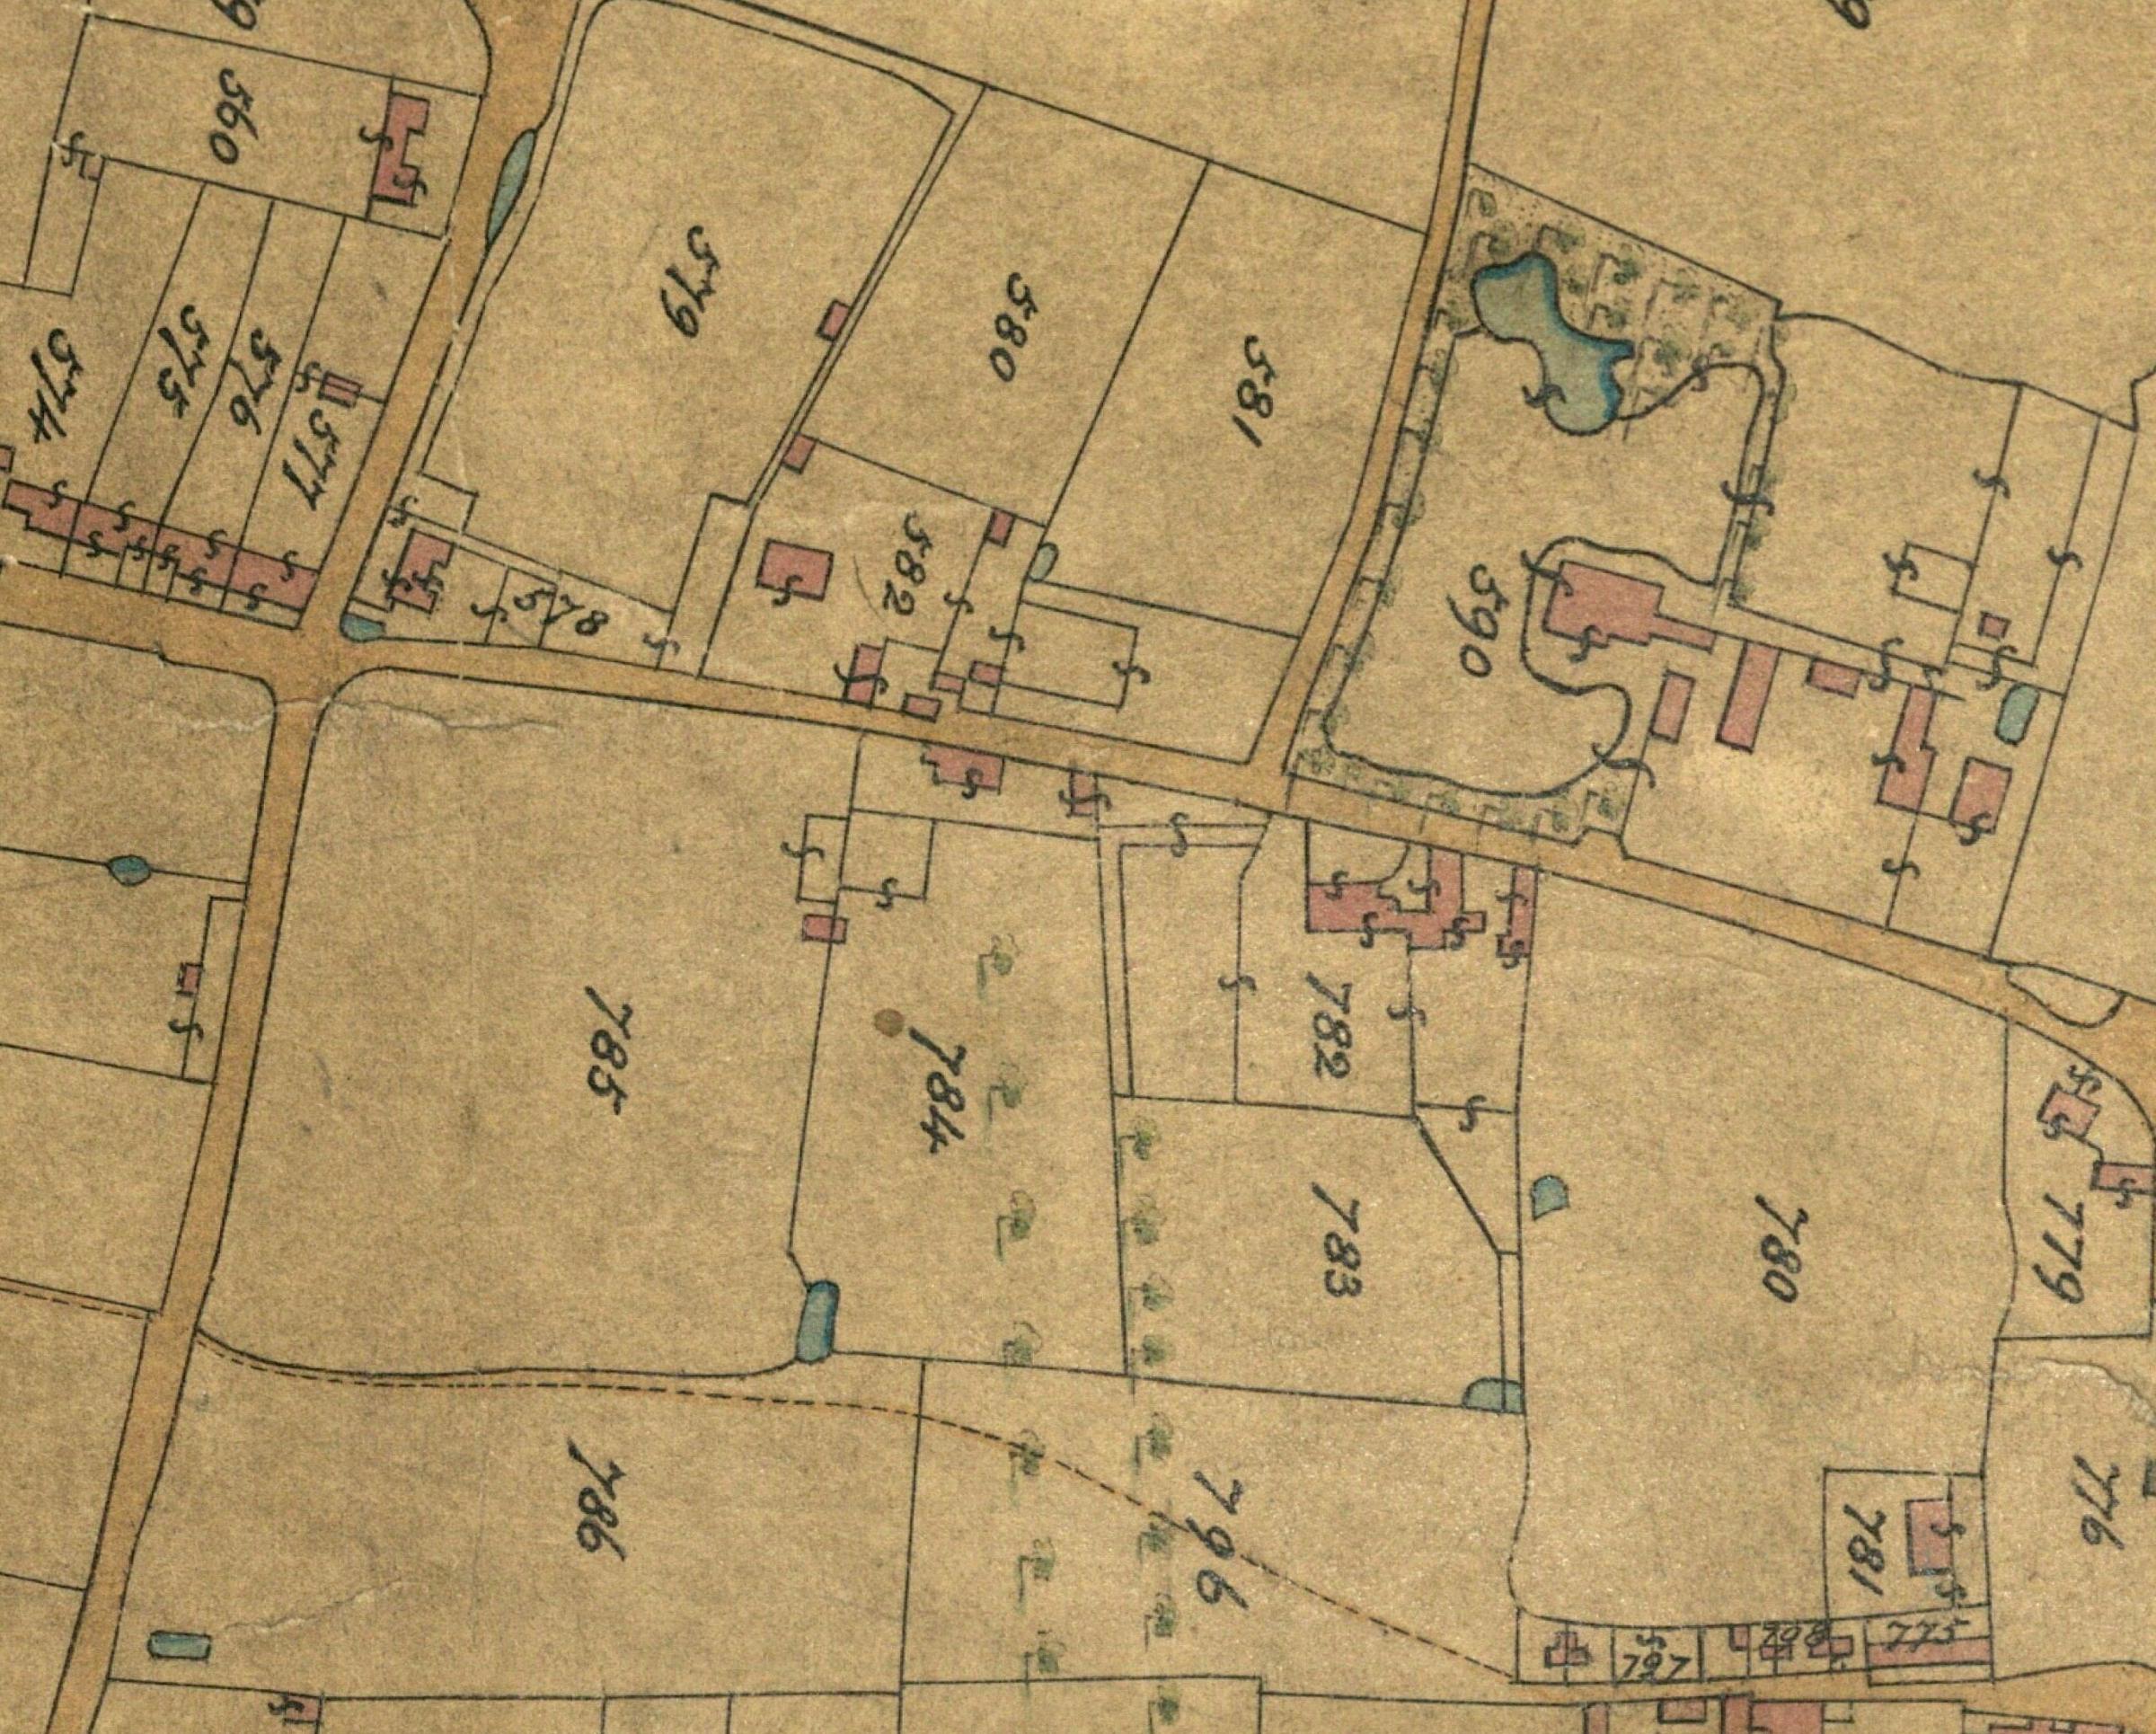 1842 tithe map for Walthamstow. Church Hill House and grounds are associated with plots 782-786